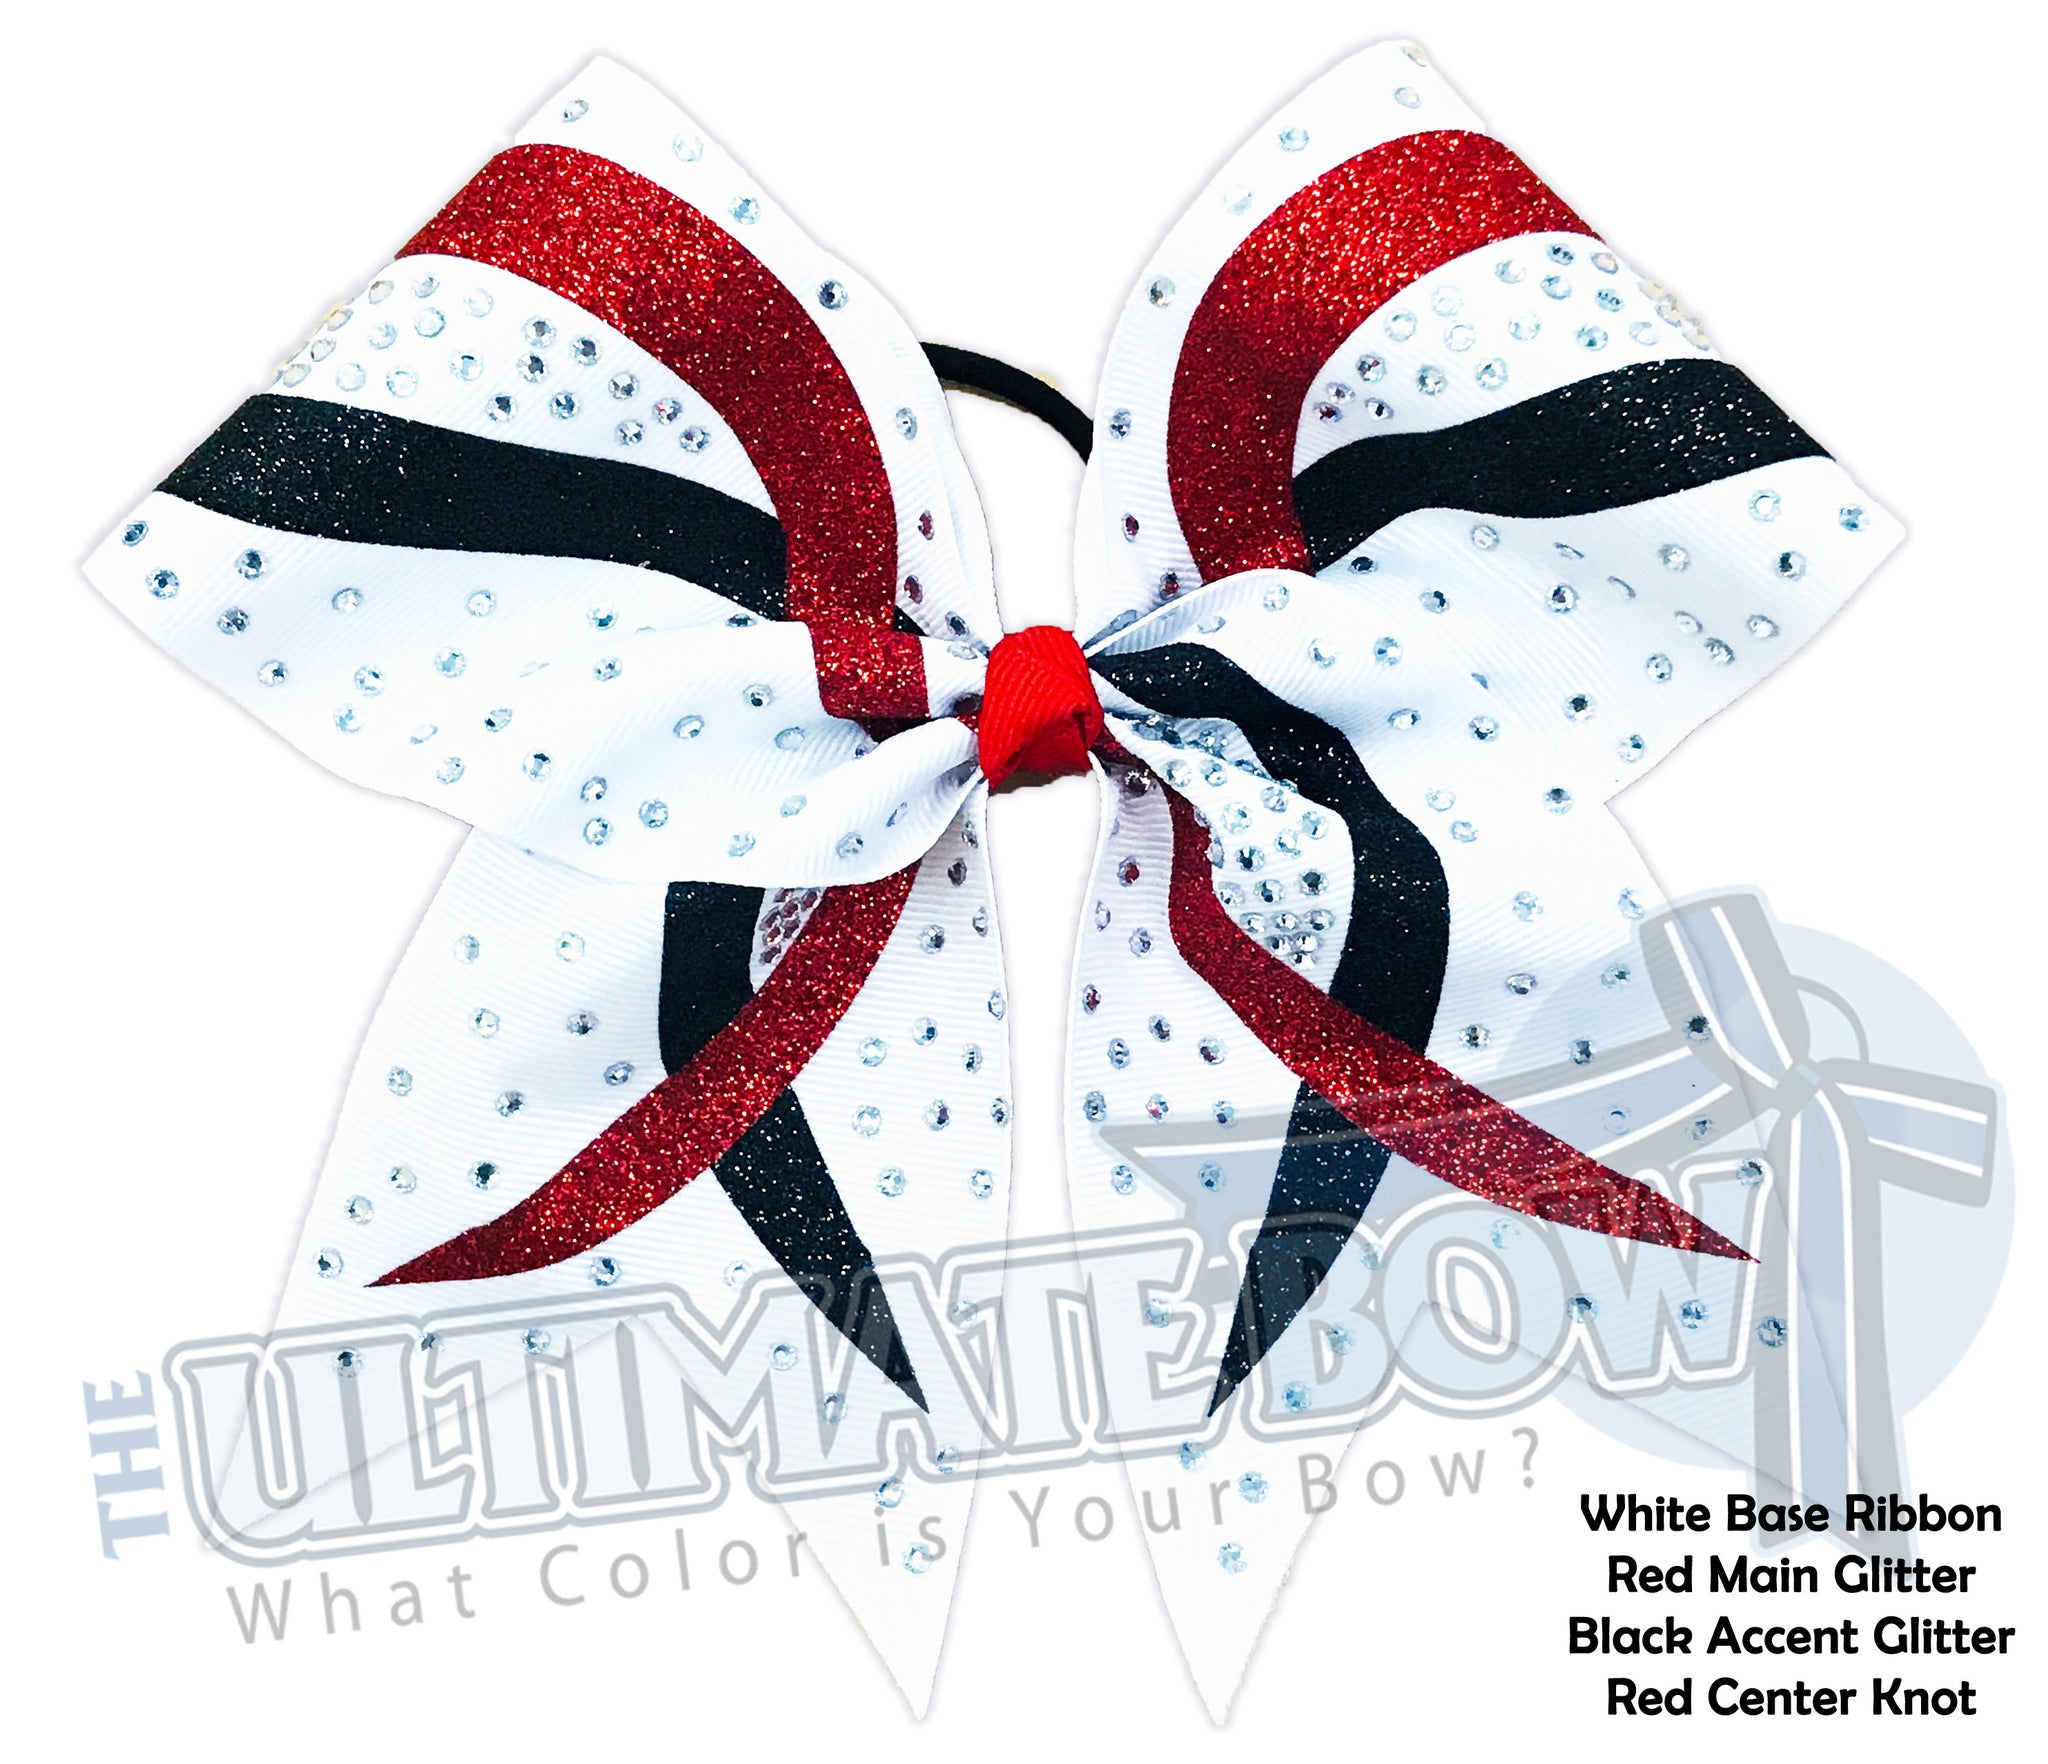 Criss Cross Cheer Bow | Black Red White Glitter and Rhinestone Cheer Bow | Competition Cheer Bow | Rhinestones and Glitter Cheer Bow 